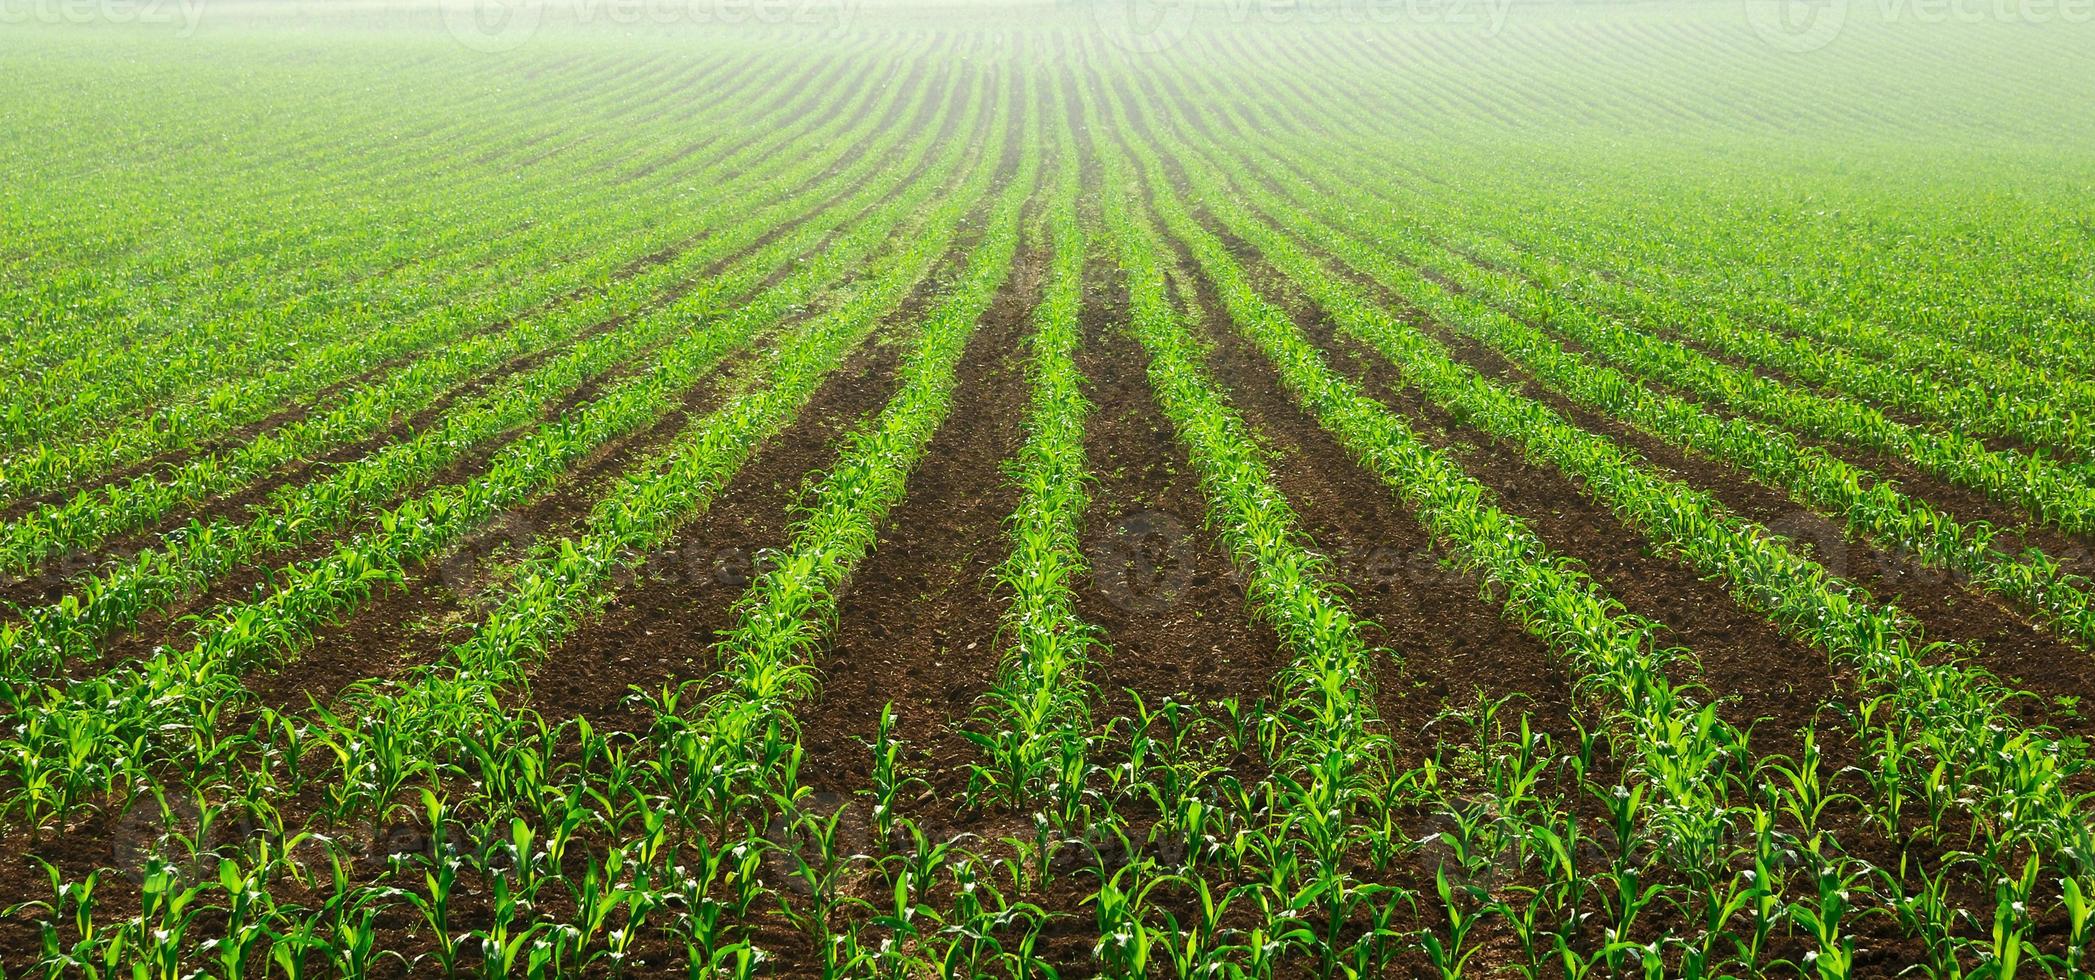 Rows of young corn plants photo